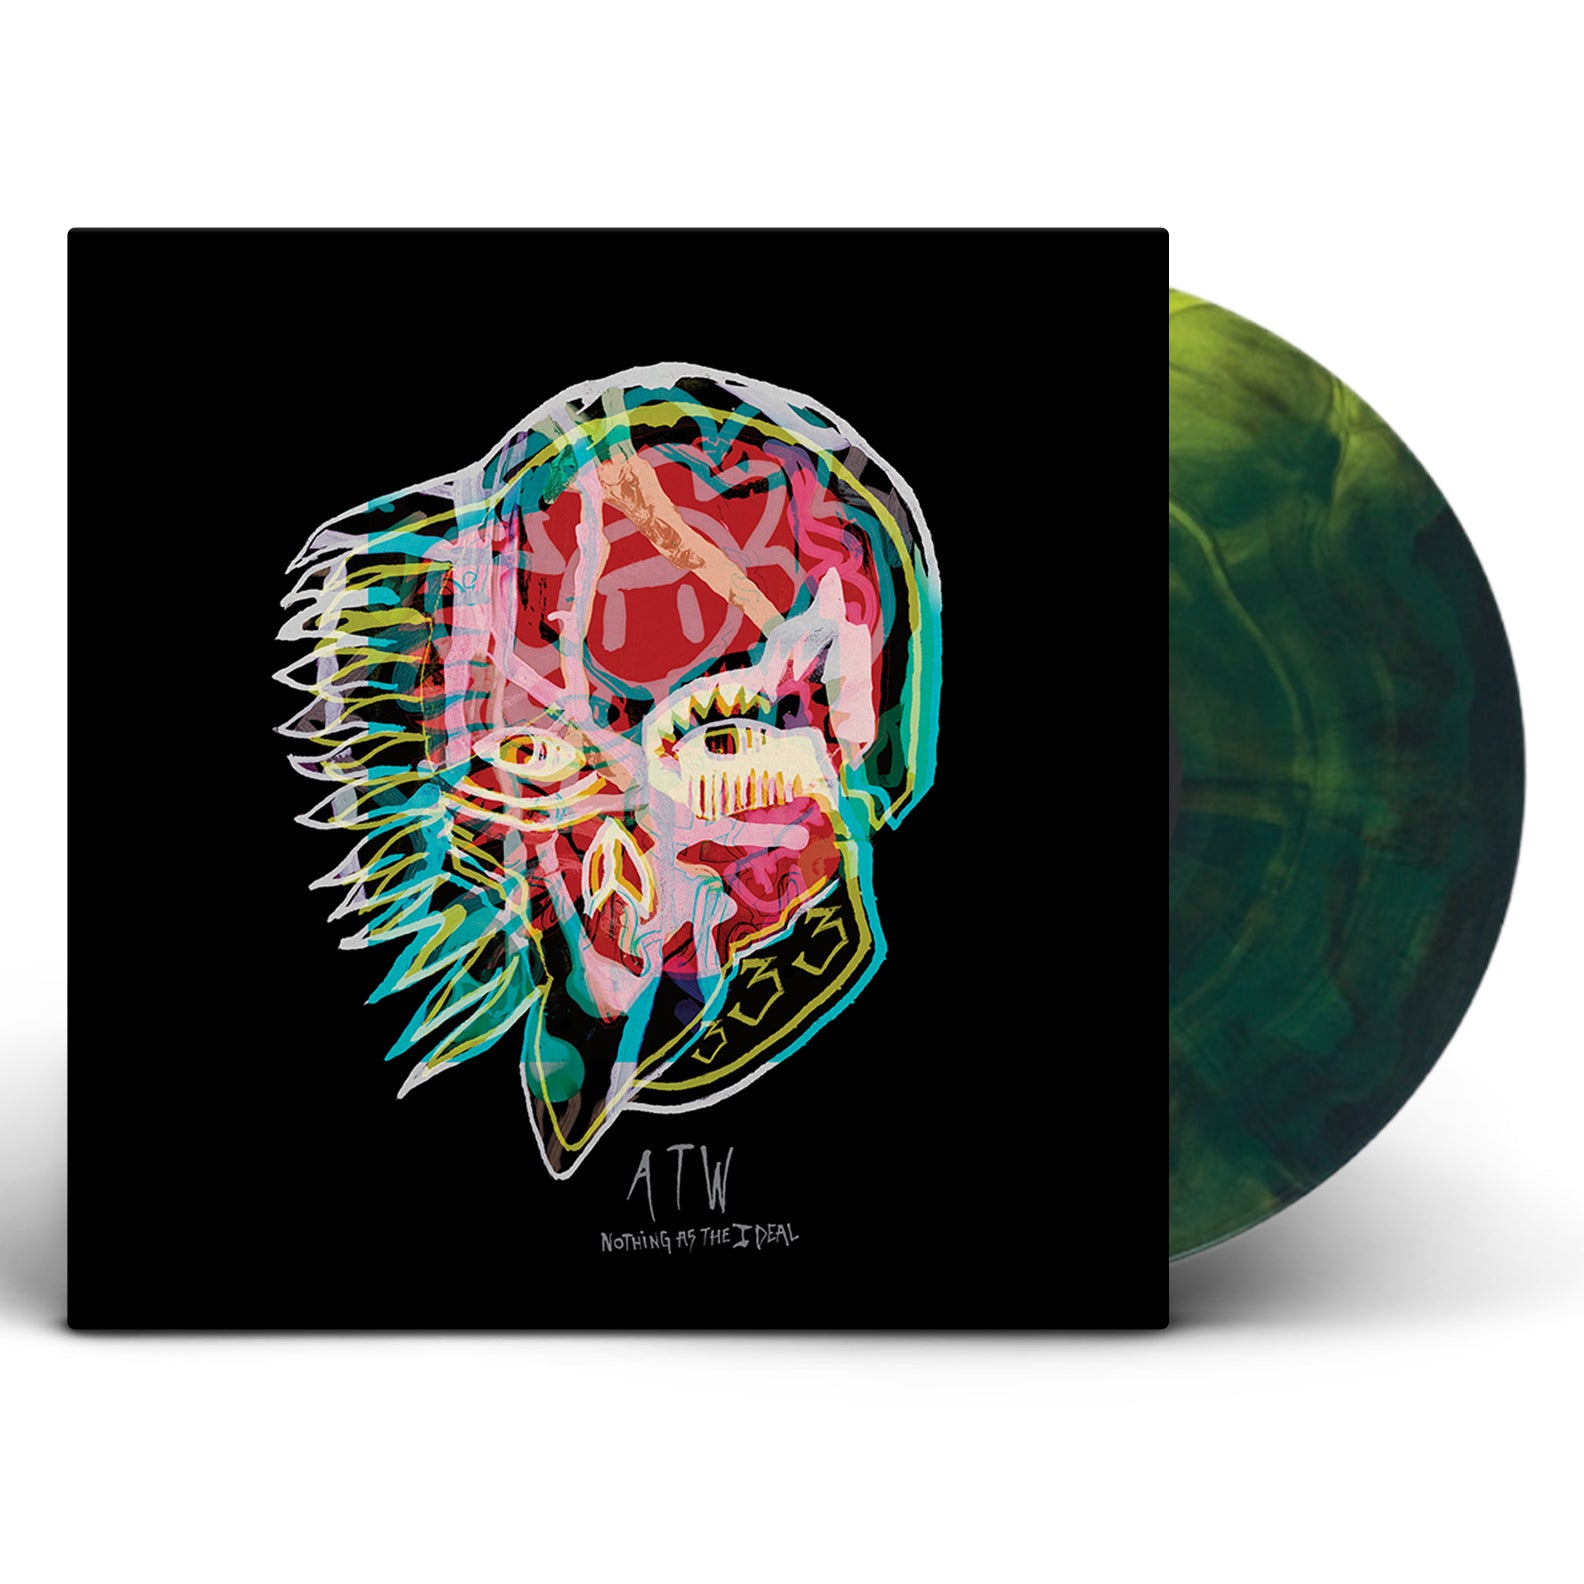 All Them Witches - Nothing As The Ideal (Limited Edition) [Green & Black Vinyl]